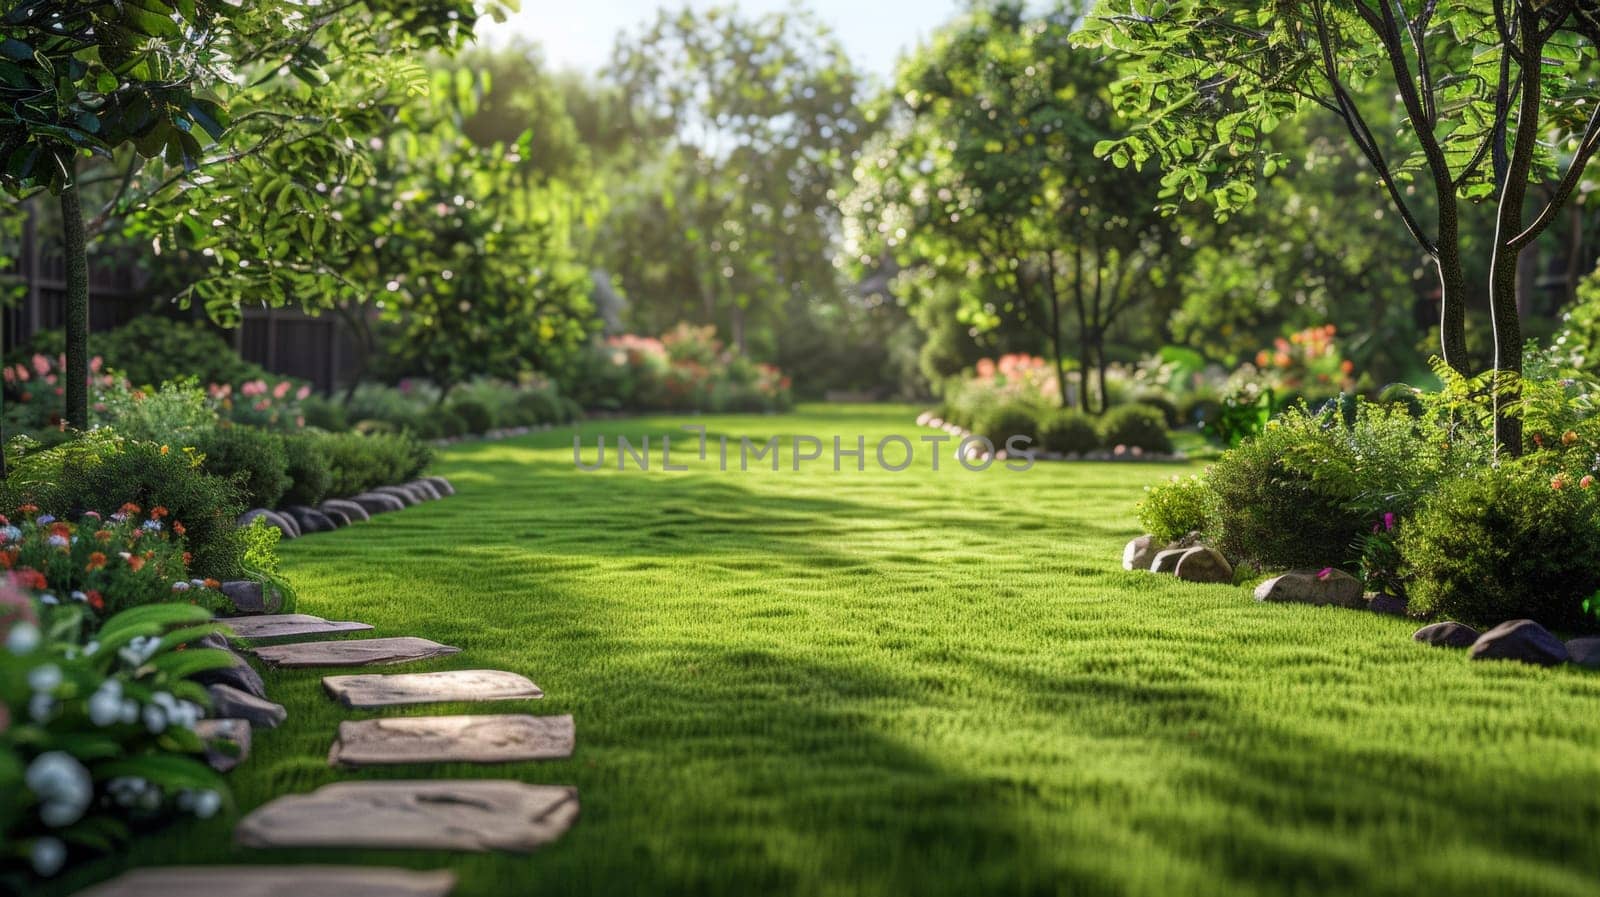 A lush green grassy lawn with stepping stones leading to a flower garden